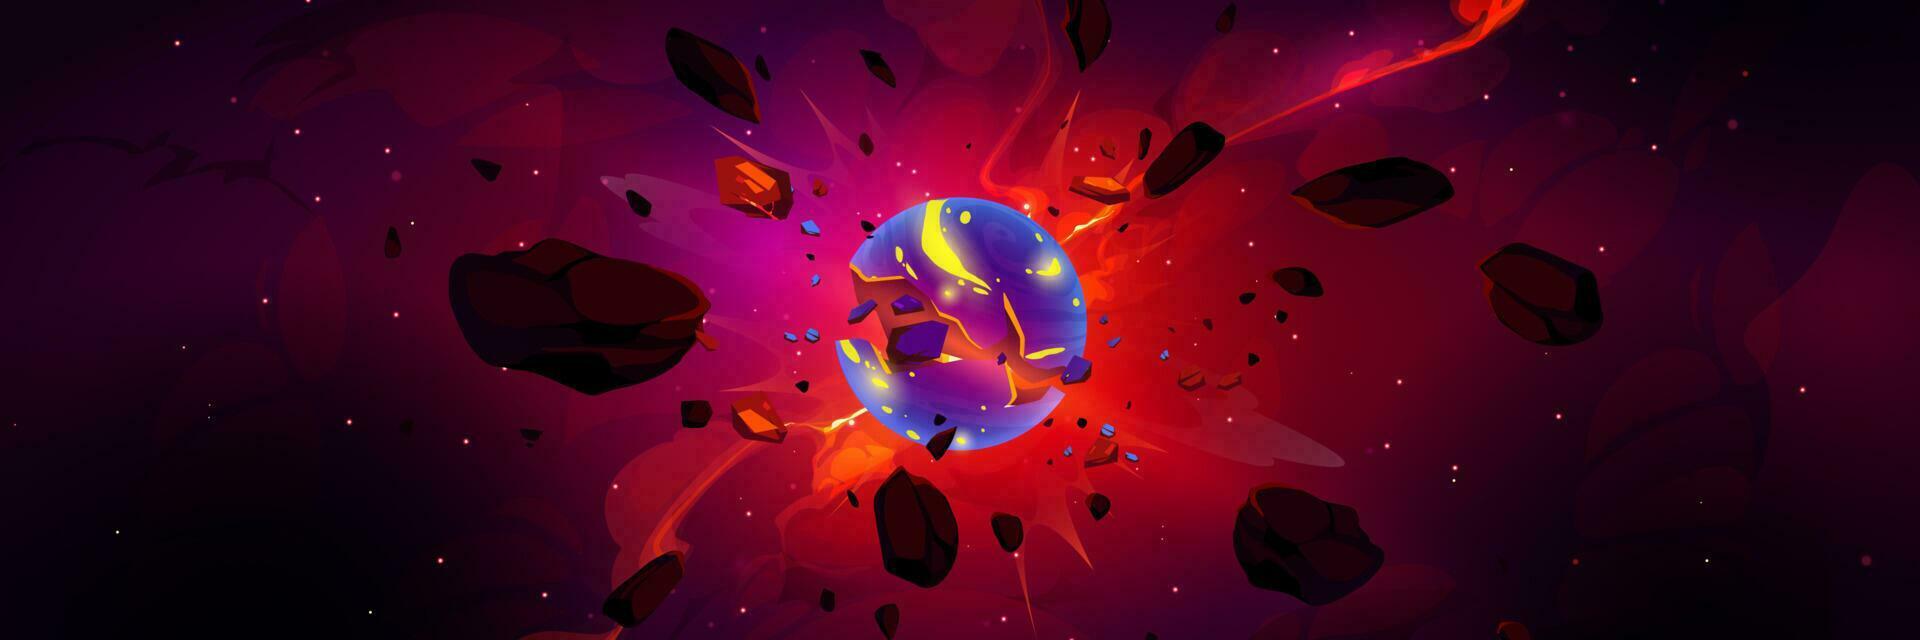 Planet explosion in outer space vector